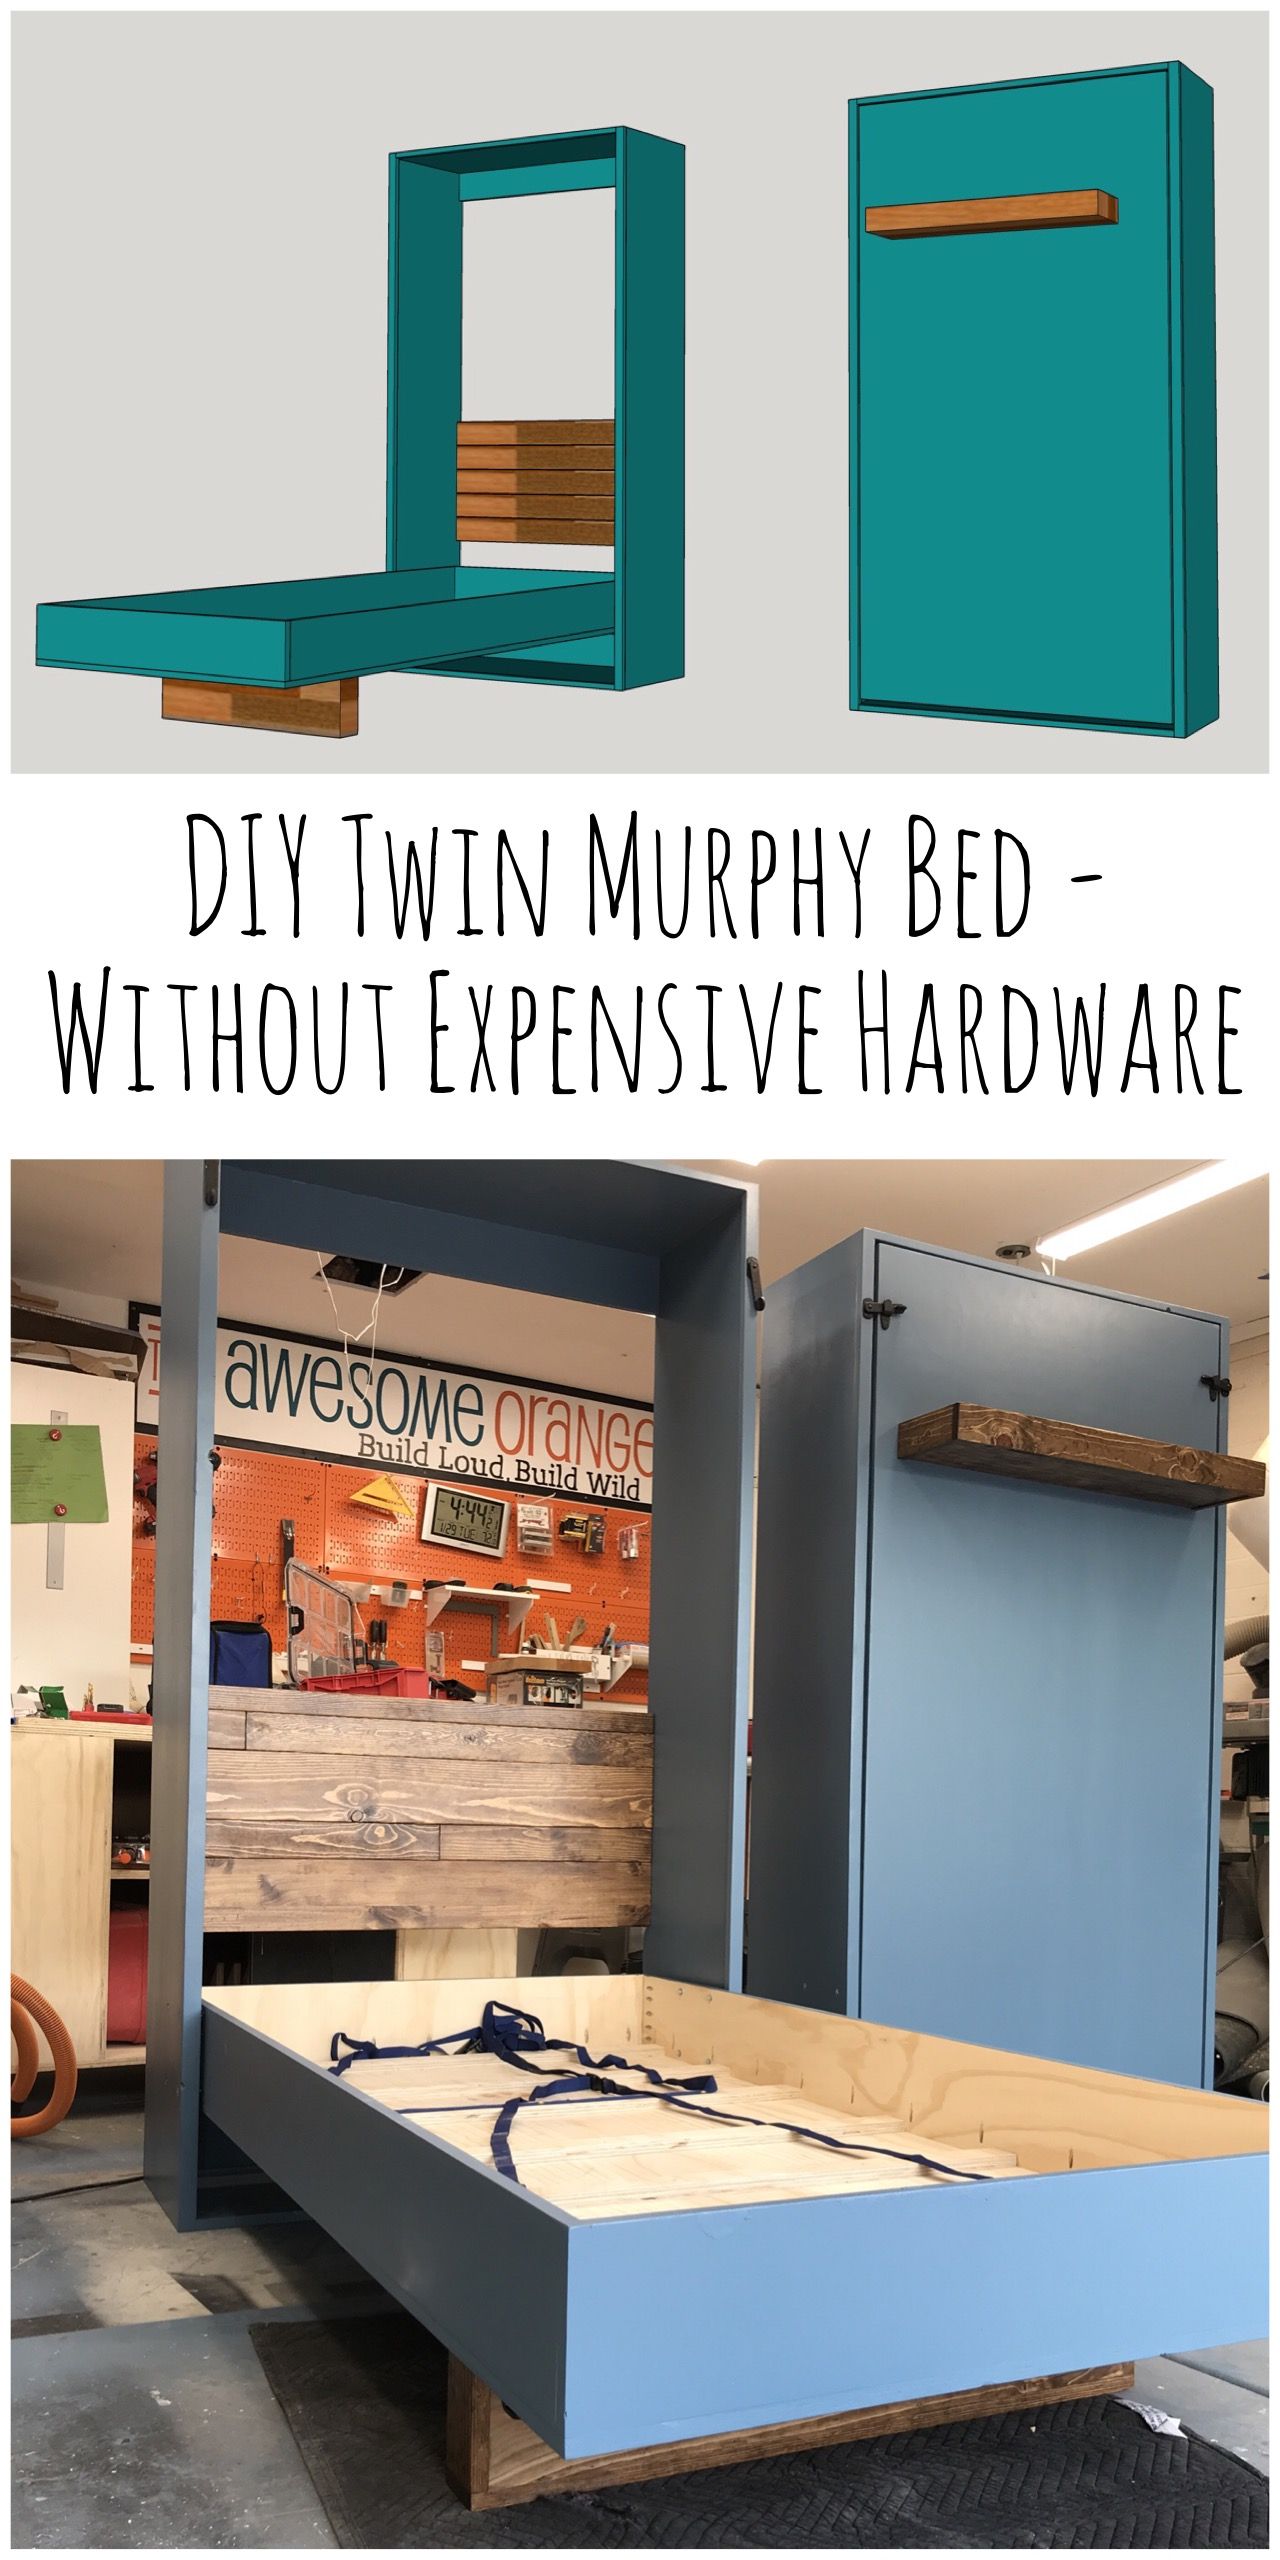 DIY Twin Murphy Beds - Without Expensive Hardware — the Awesome Orange